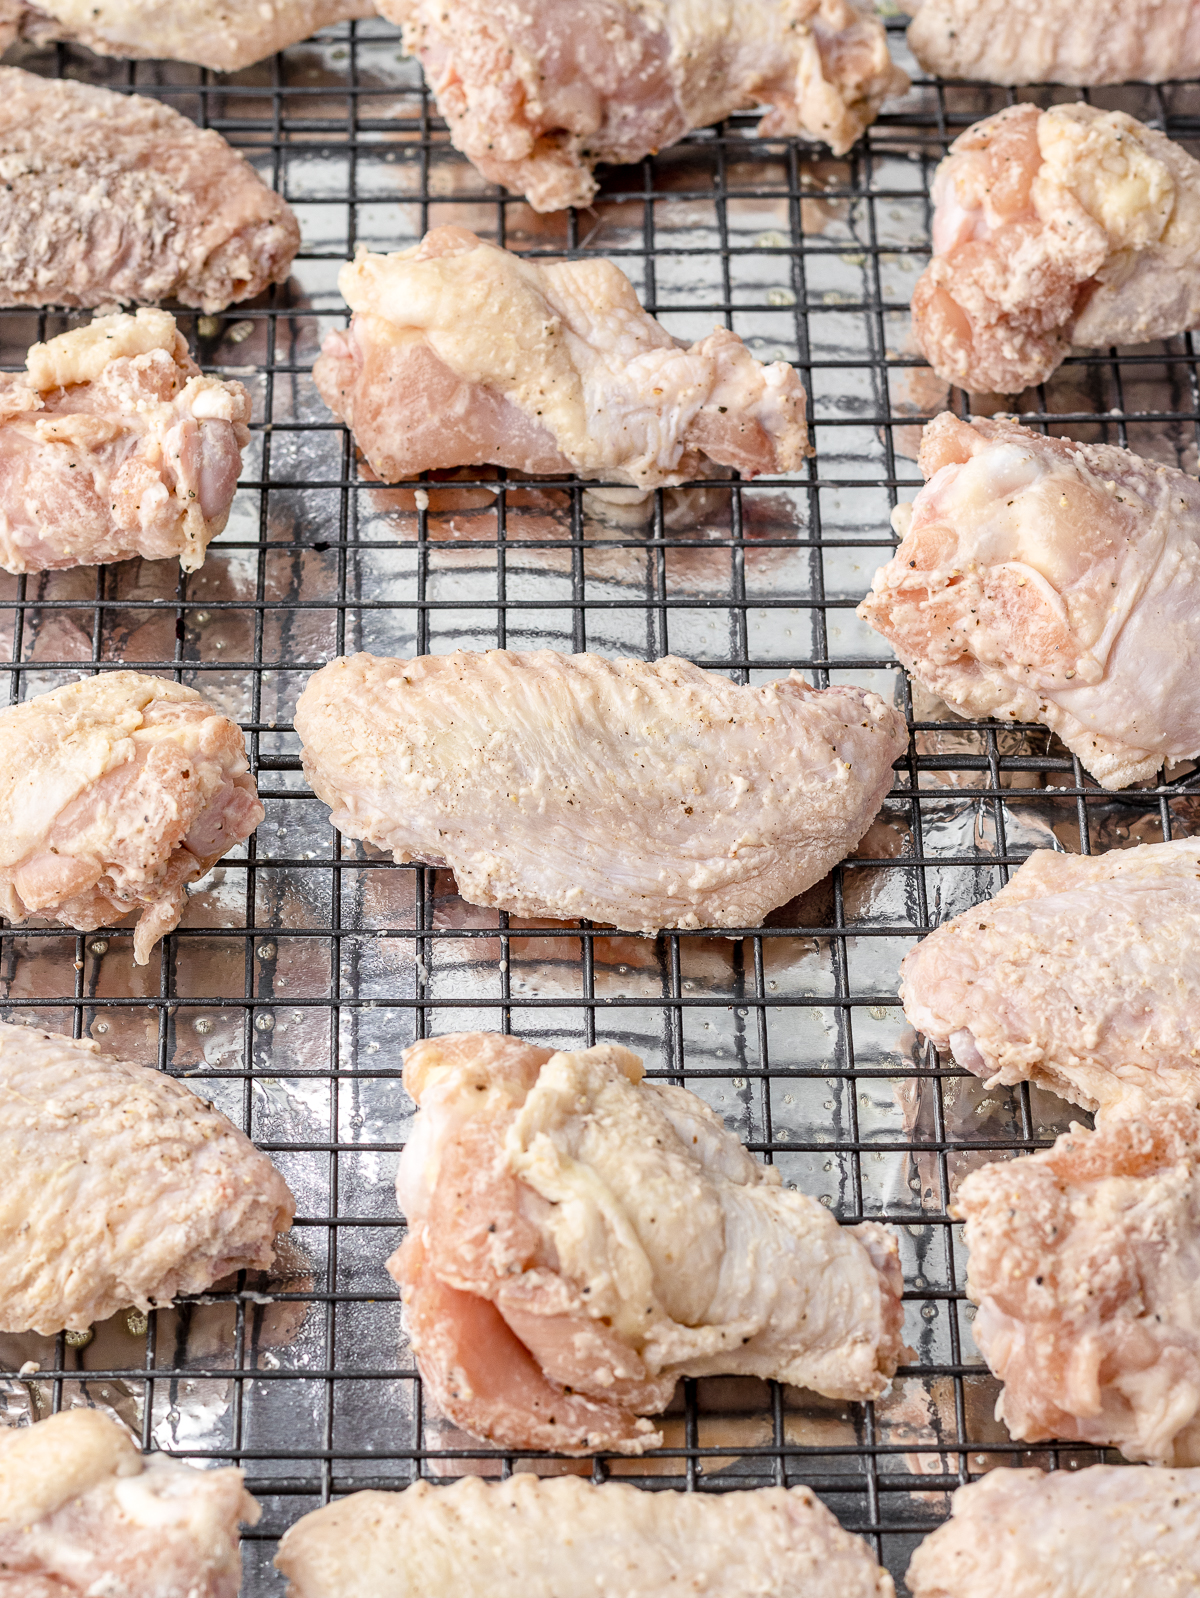 Chicken wings tossed in seasoning and baking powder on a rack lined baking sheet. Ready to go in the oven.